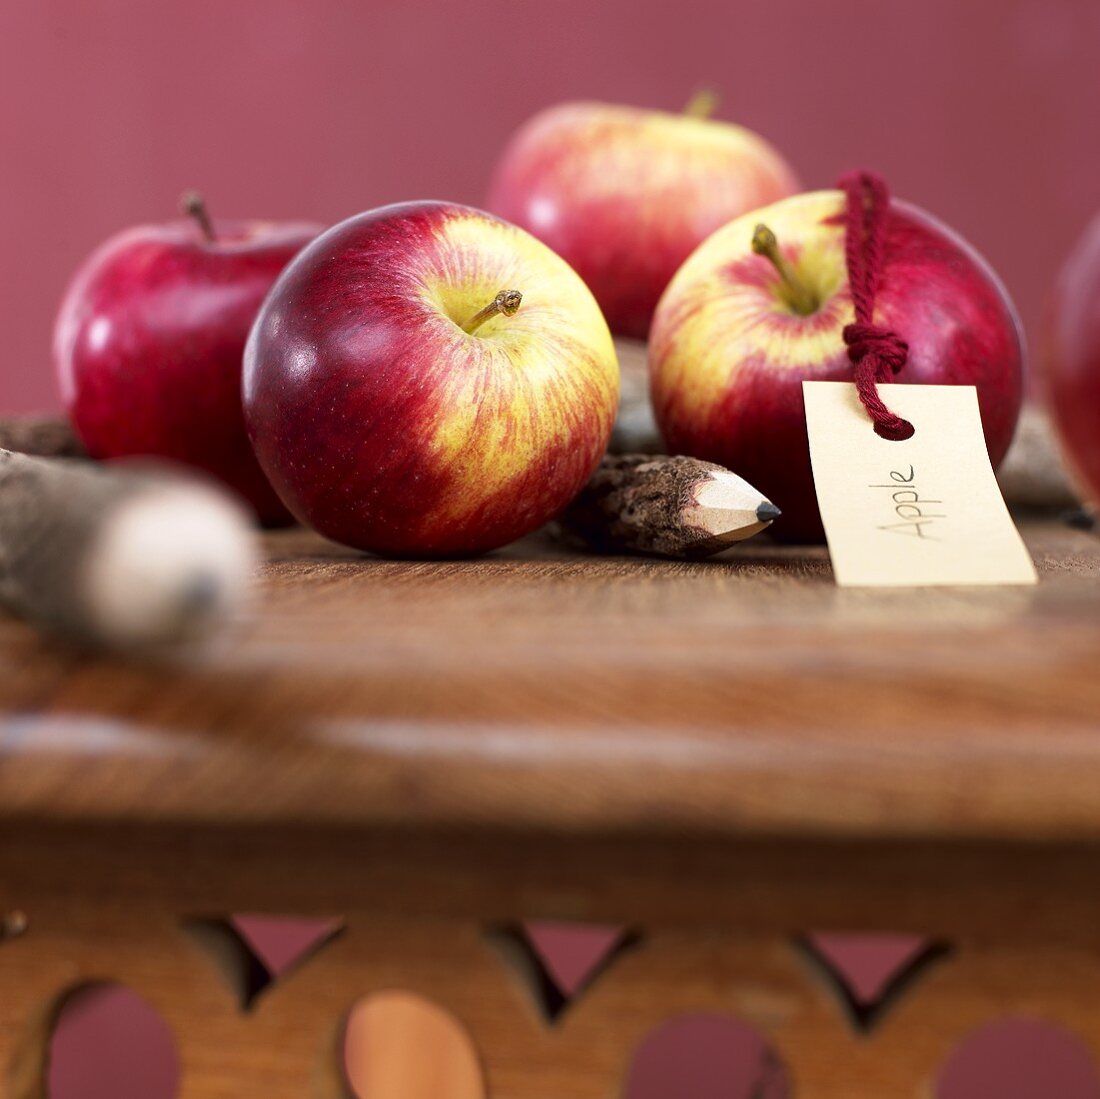 Apples and pencils on wooden table